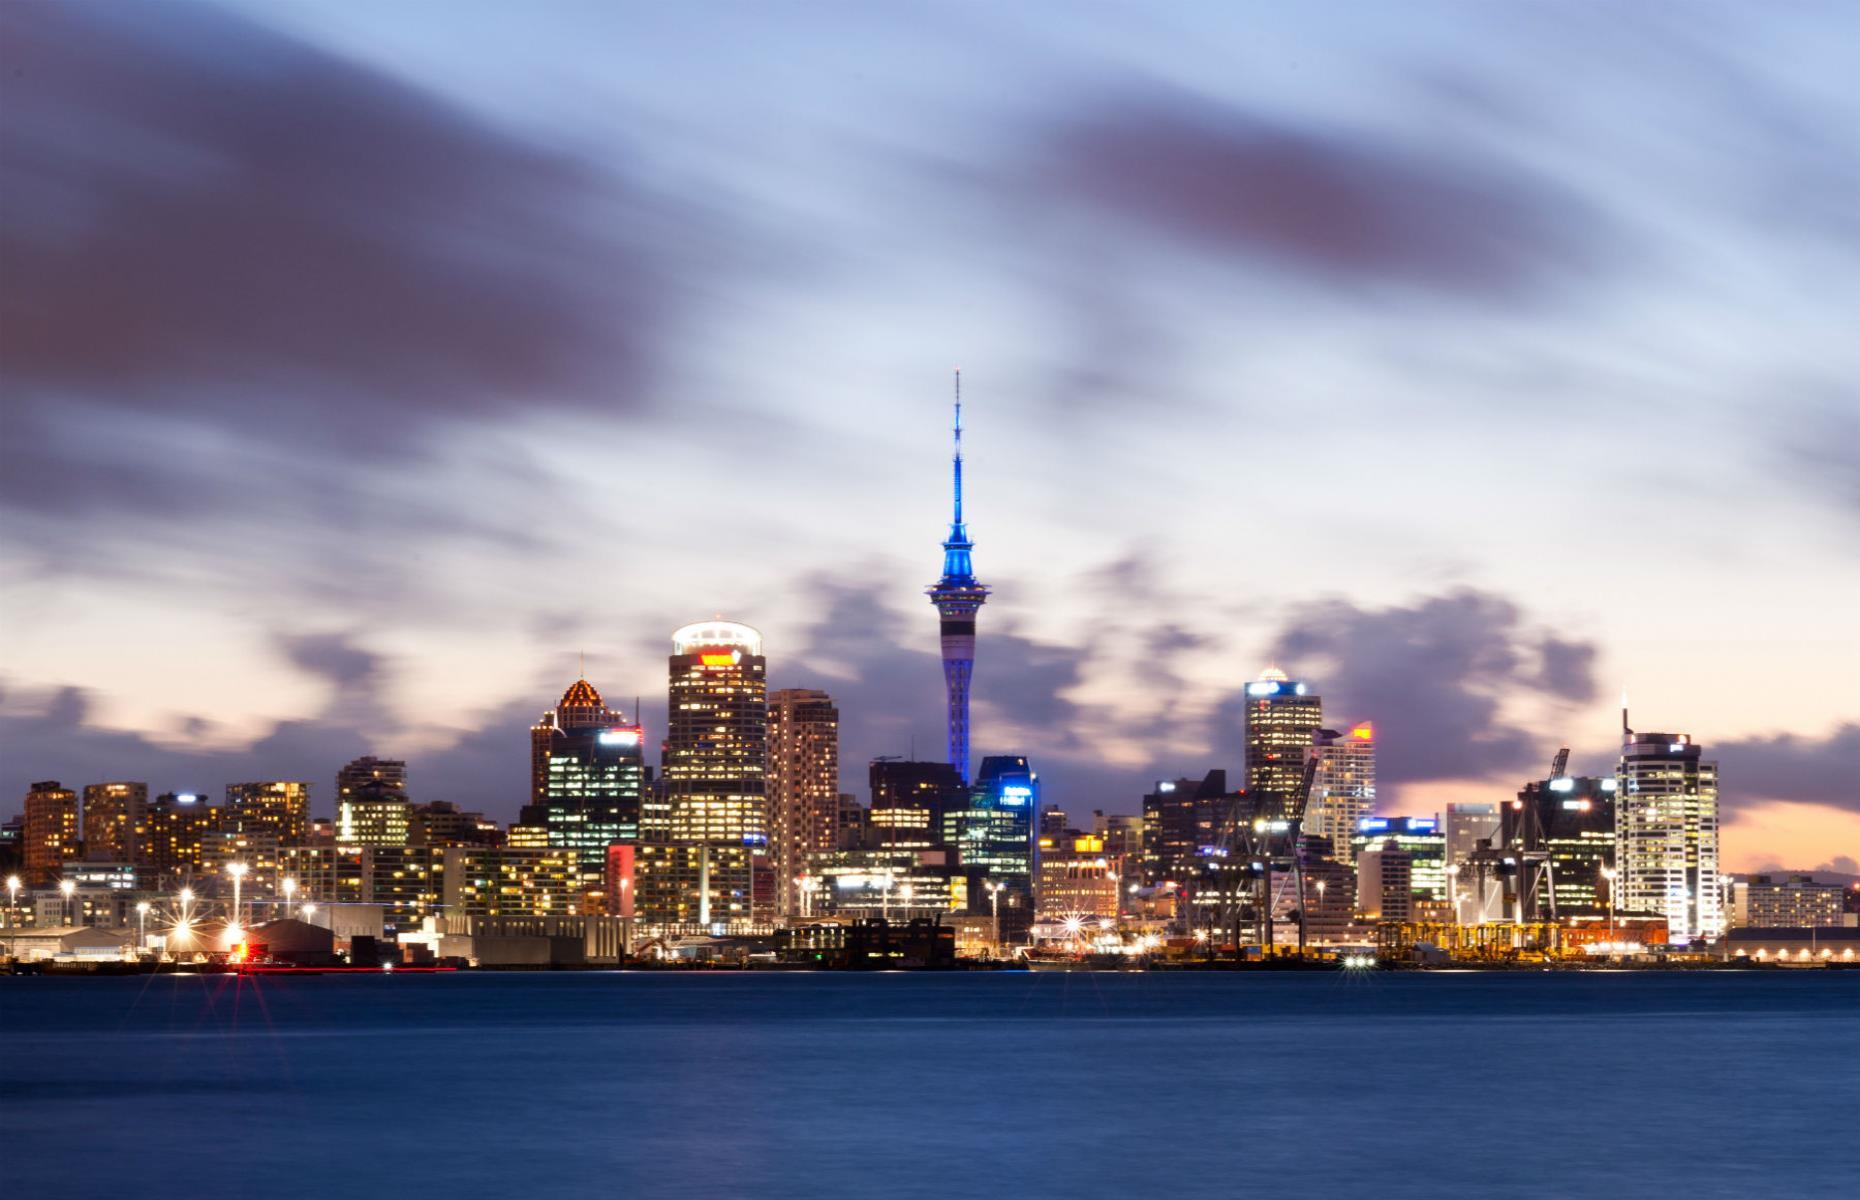 <p><strong>Index score: 68.96</strong></p>  <p>New Zealand ranks 10th overall on Numbeo's quality of life index, despite being the 16th most expensive country in the world. One of the main reasons why the cost of living is so high in New Zealand is the fact that it has to import so many of its goods, which are then saddled with import taxes. Housing is also expensive, particularly in Auckland where the average property price was NZ$1.2 million ($750k/£618k) in September 2021, according to <em>Statista</em>.</p>